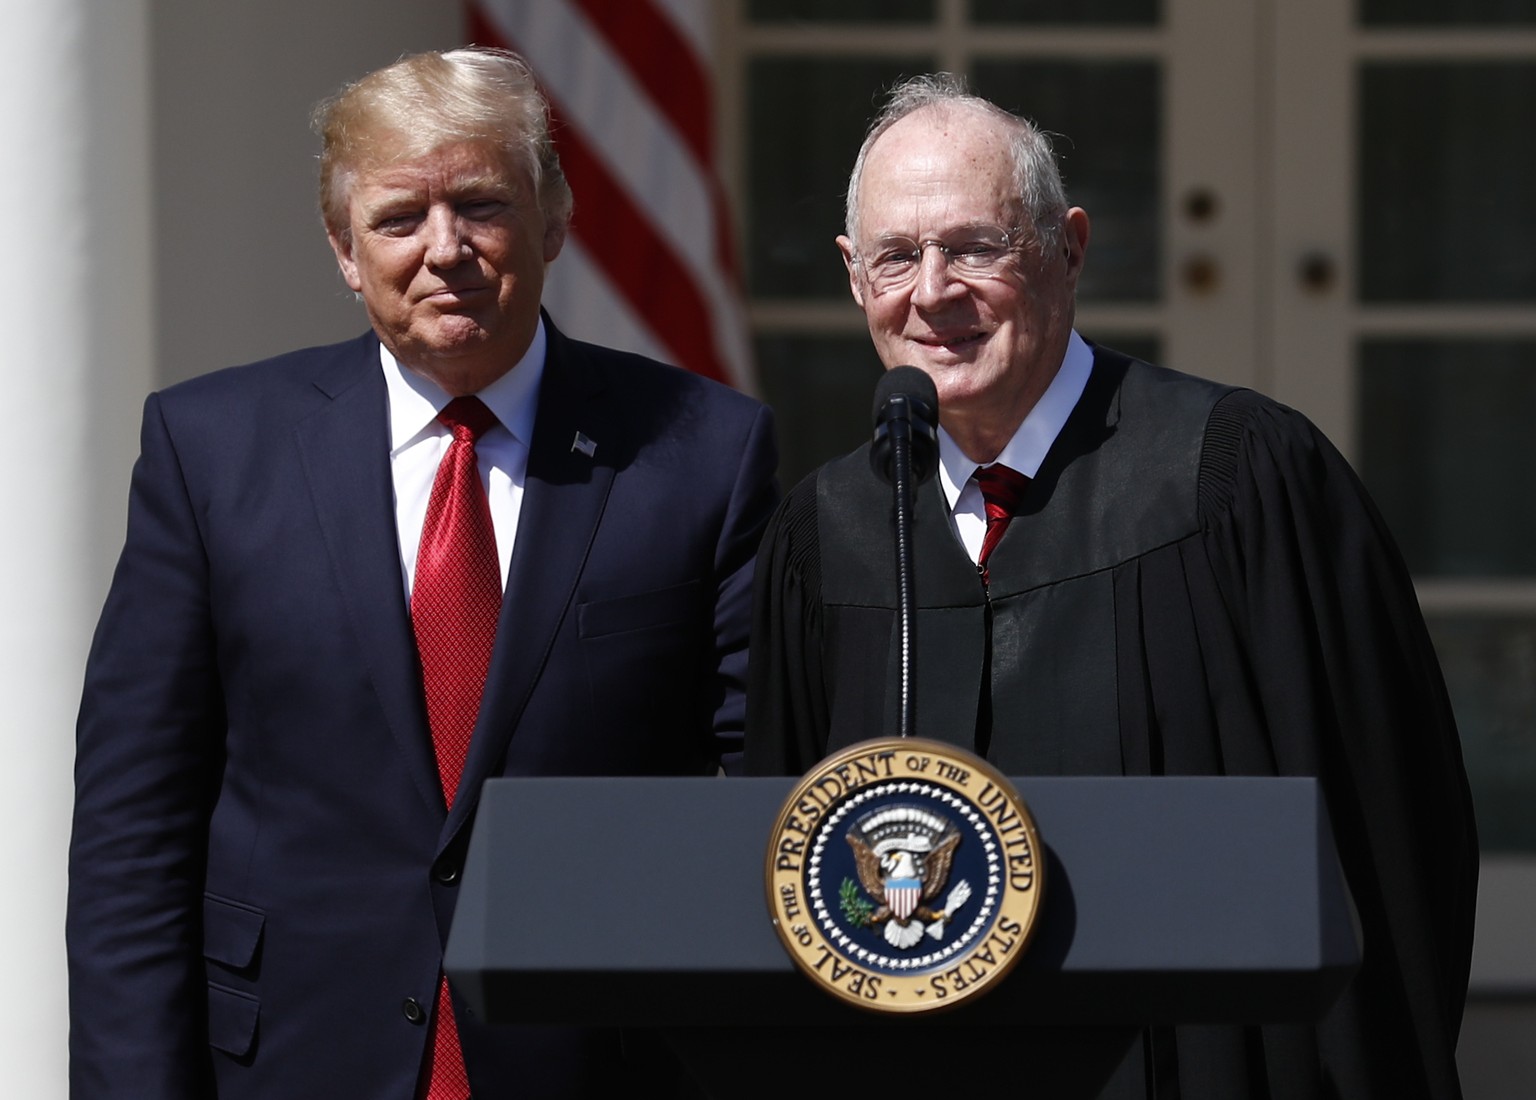 FILE - In this April 10, 2017, file photo, President Donald Trump, left, and Supreme Court Justice Anthony Kennedy participate in a public swearing-in ceremony for Justice Neil Gorsuch in the Rose Gar ...